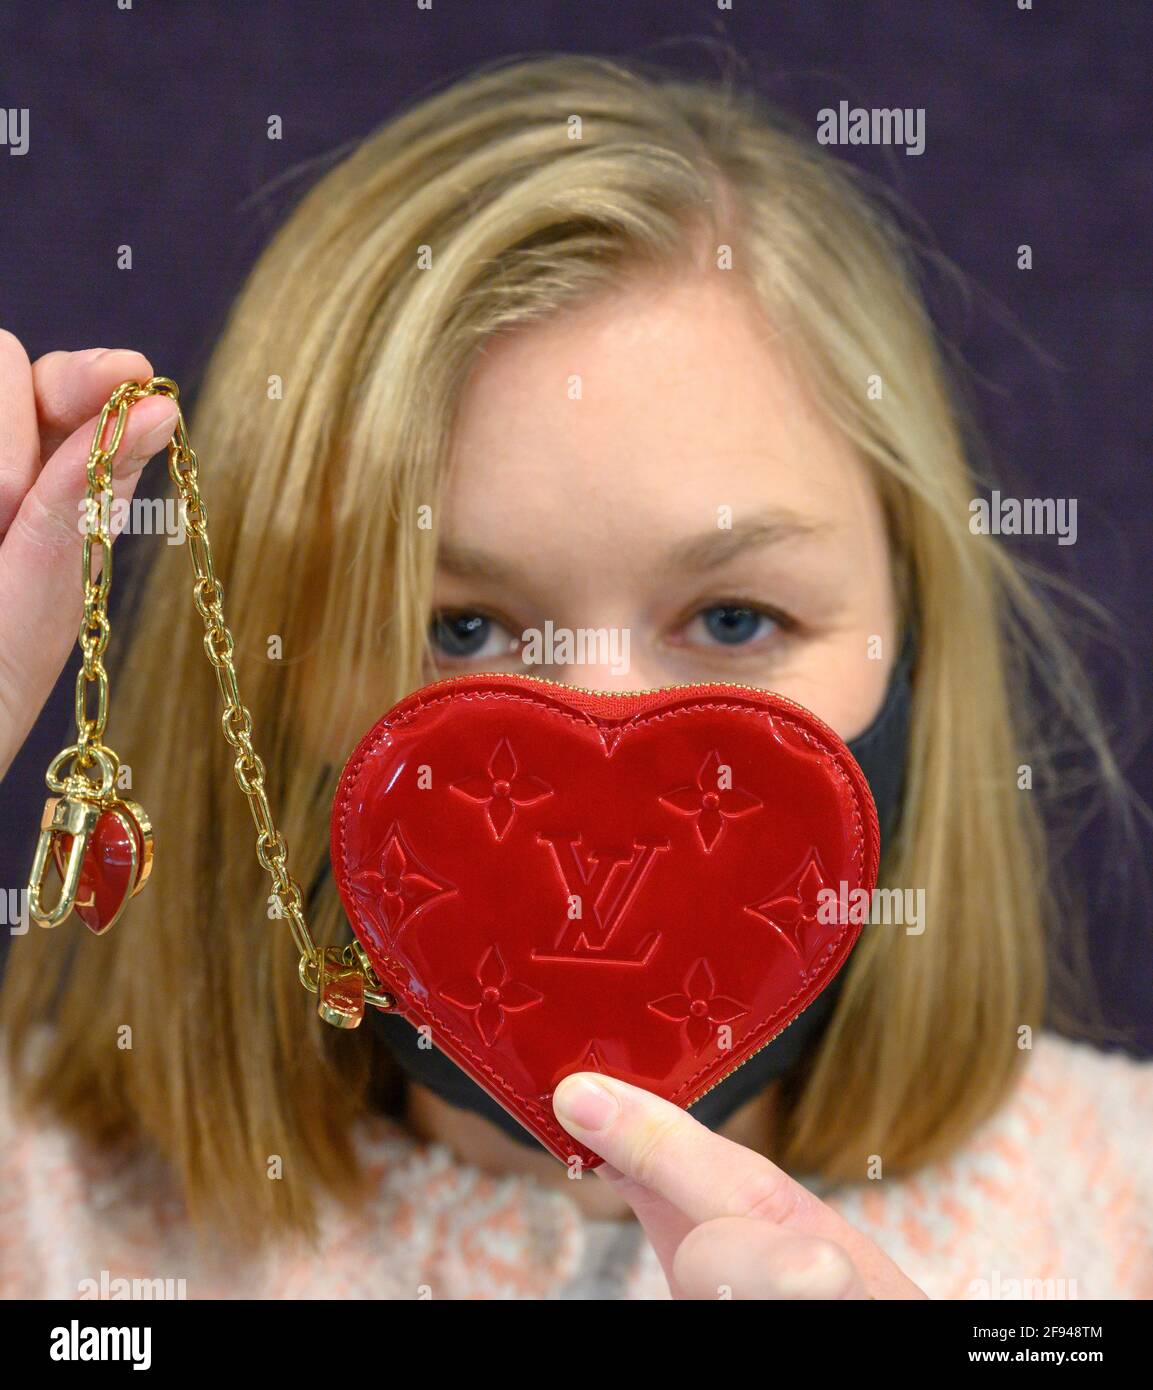 Sold at Auction: LOUIS VUITTON MOMOGRAMMED COEUR HEART COIN CASE